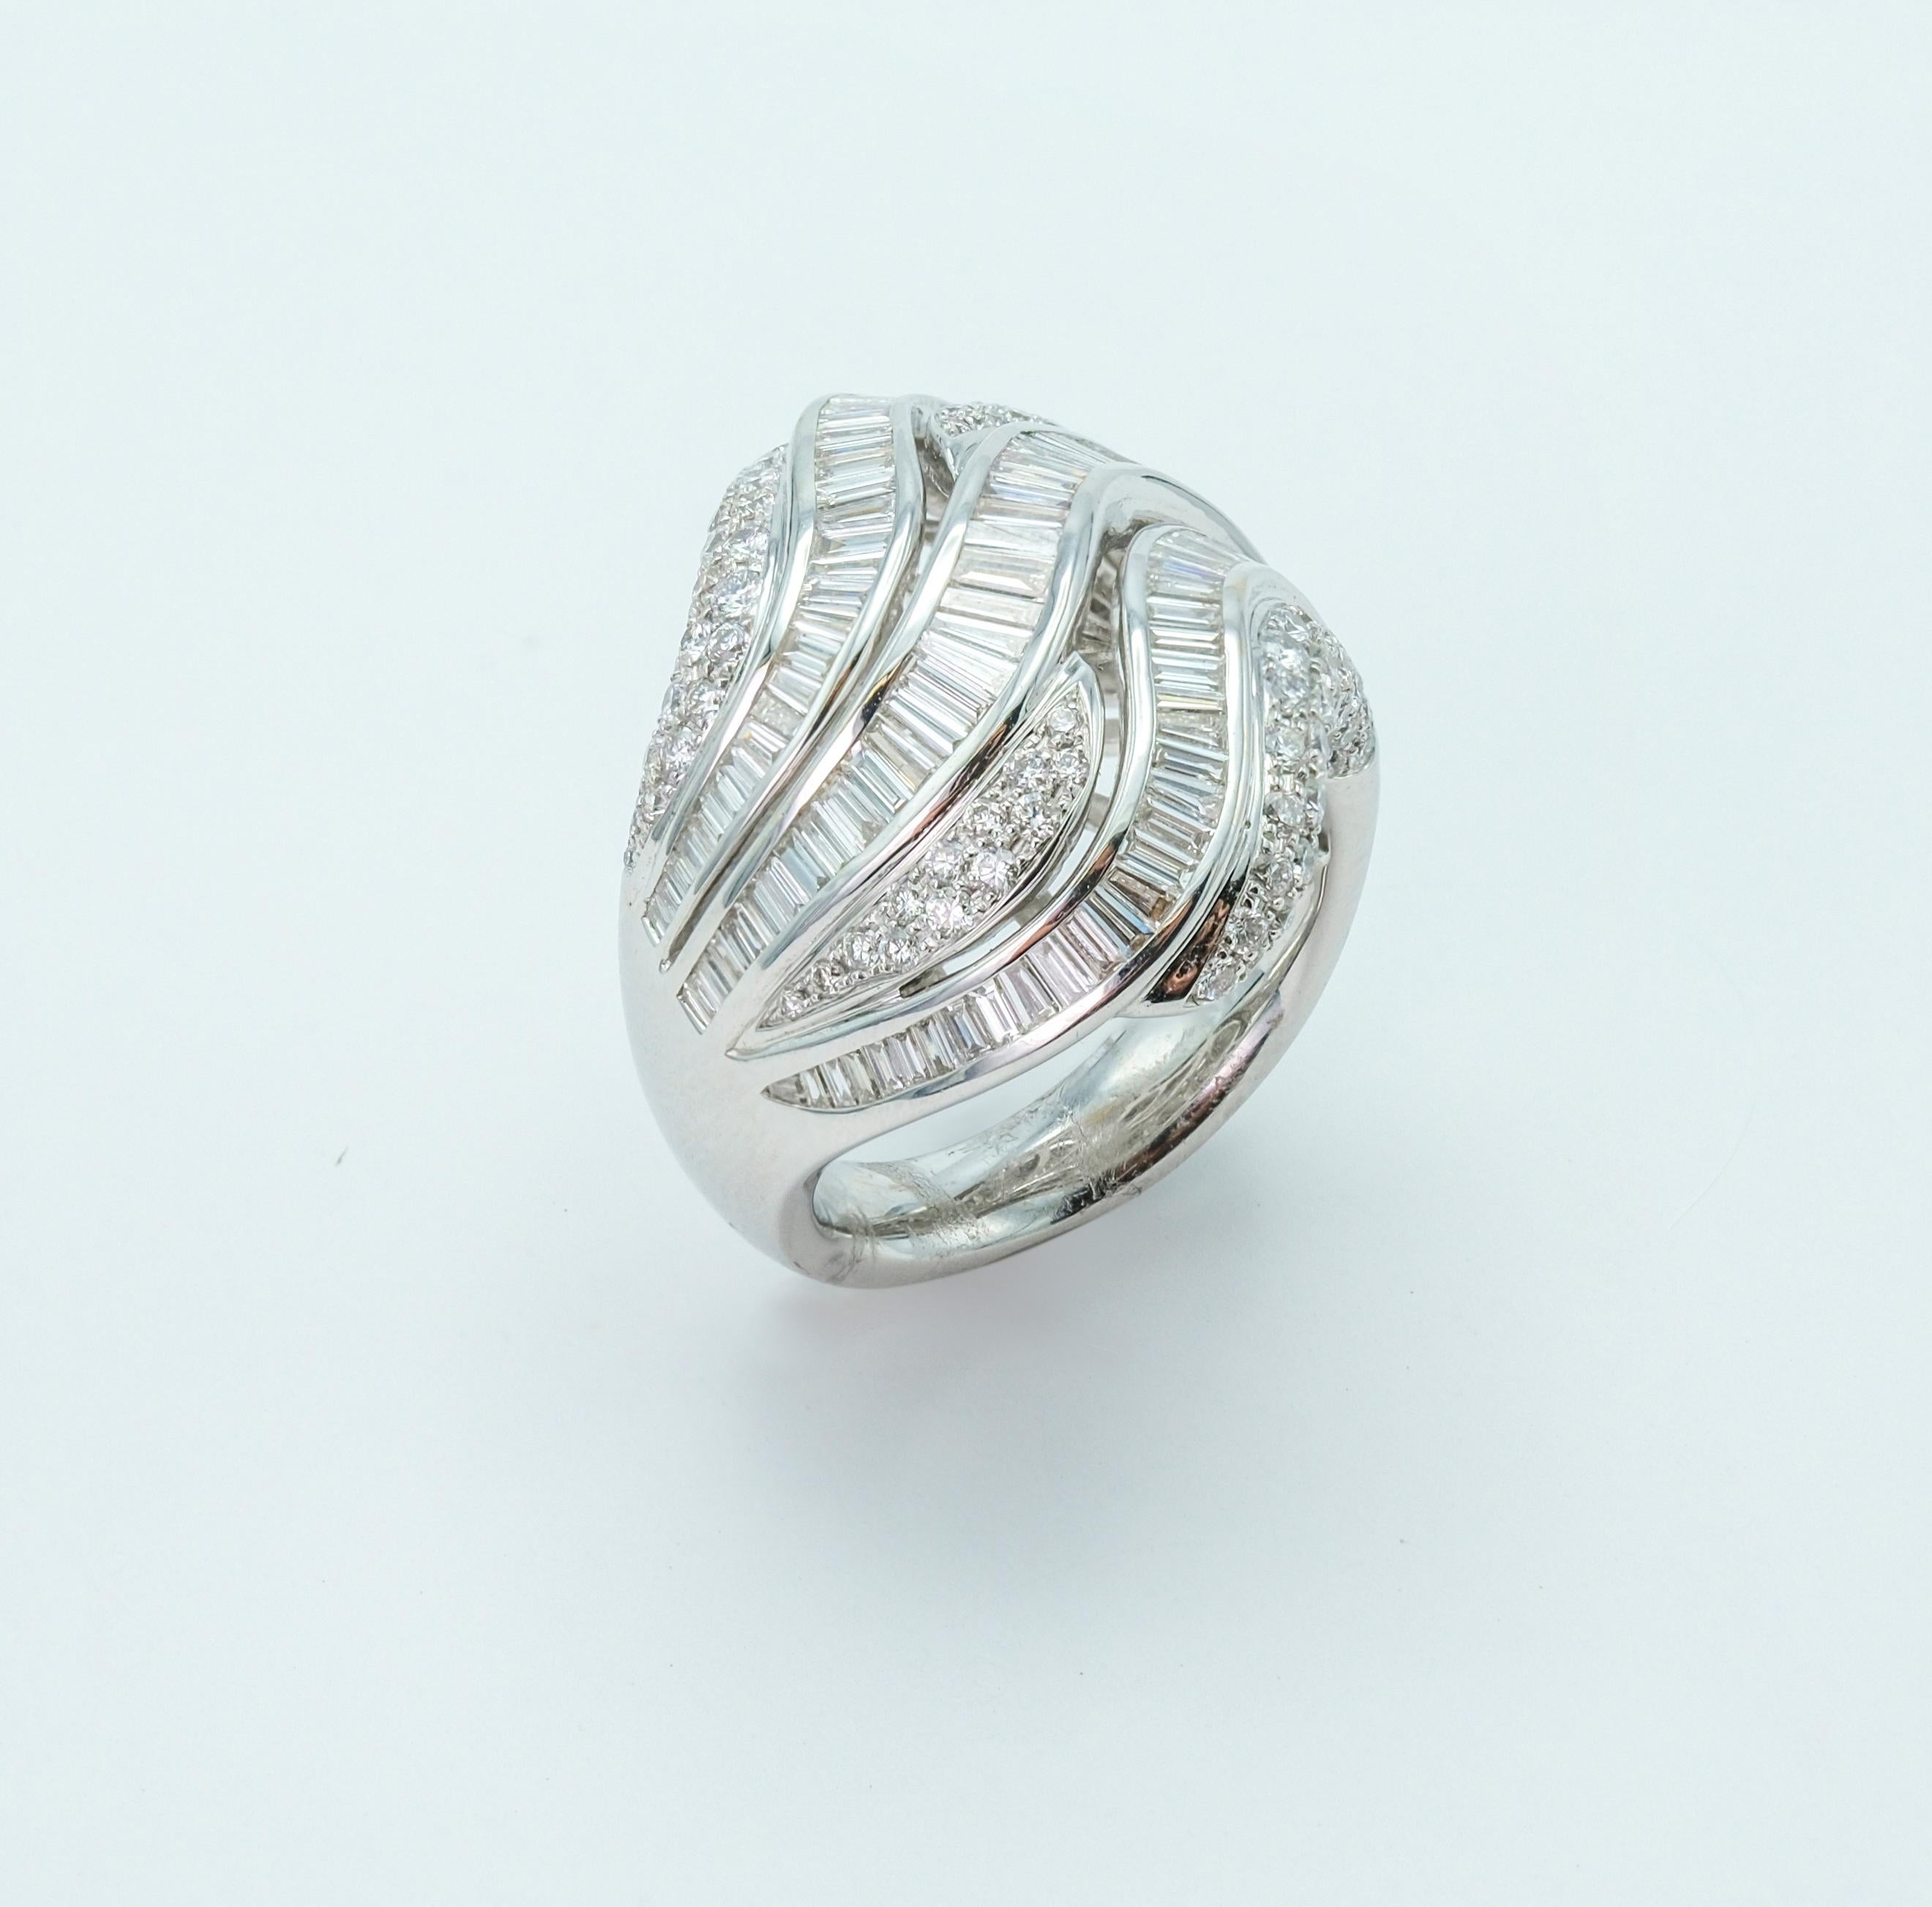 18 Karat White Gold Diamond Dome Cocktail Ring 3.32 Carats In Good Condition For Sale In Fairfield, CT